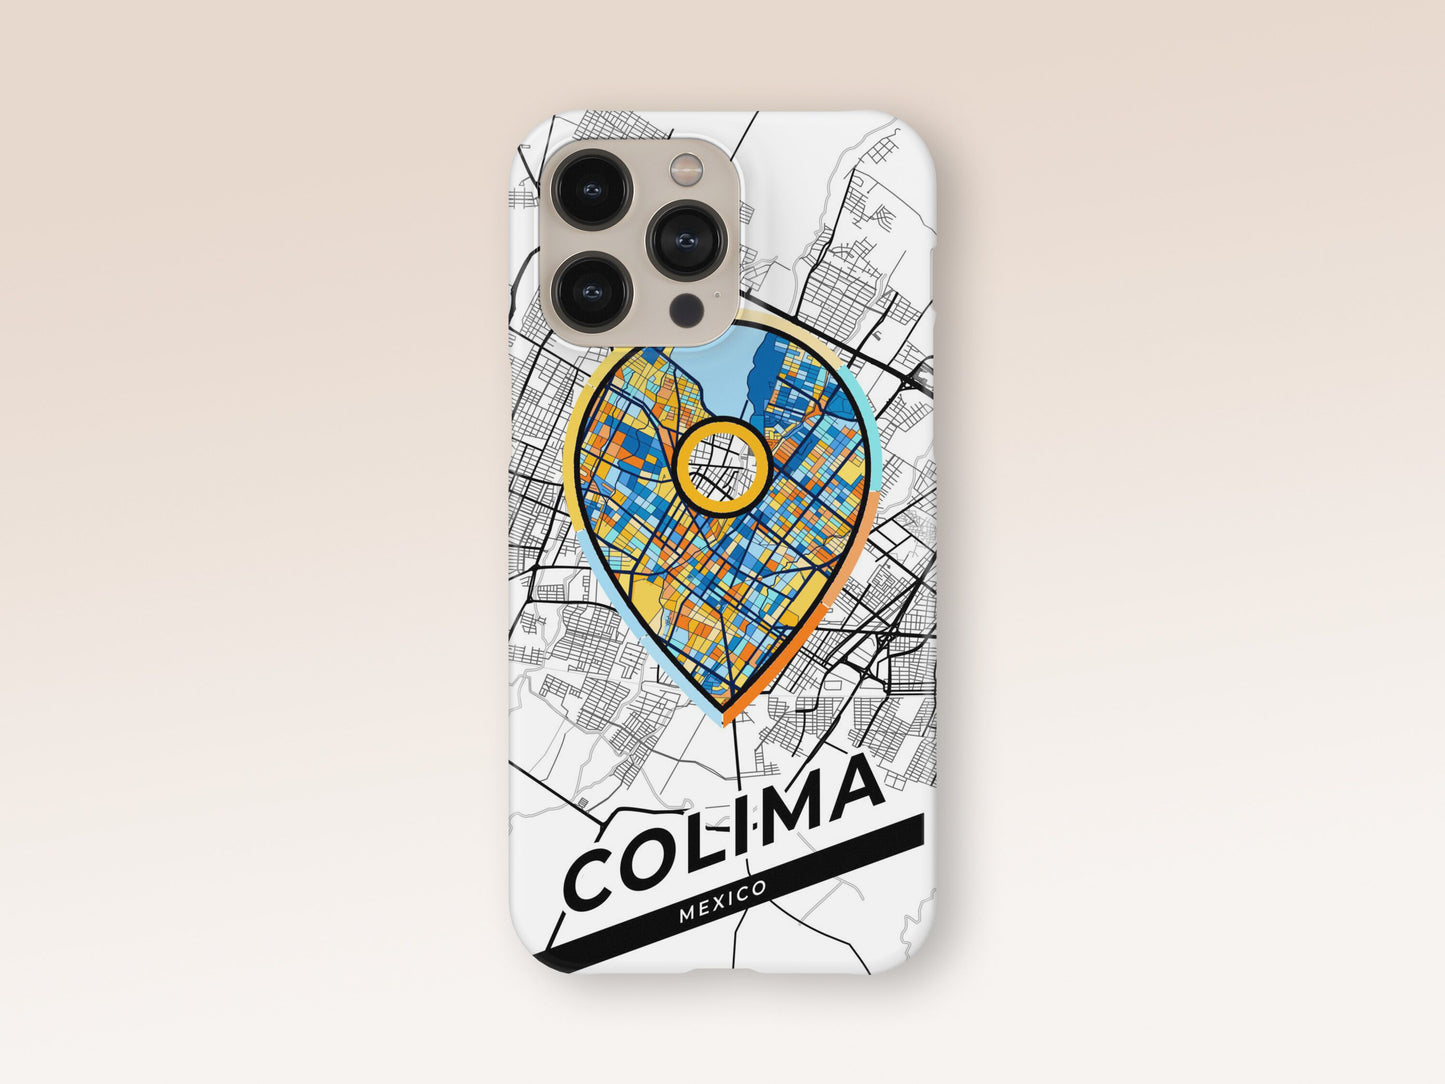 Colima Mexico slim phone case with colorful icon. Birthday, wedding or housewarming gift. Couple match cases. 1